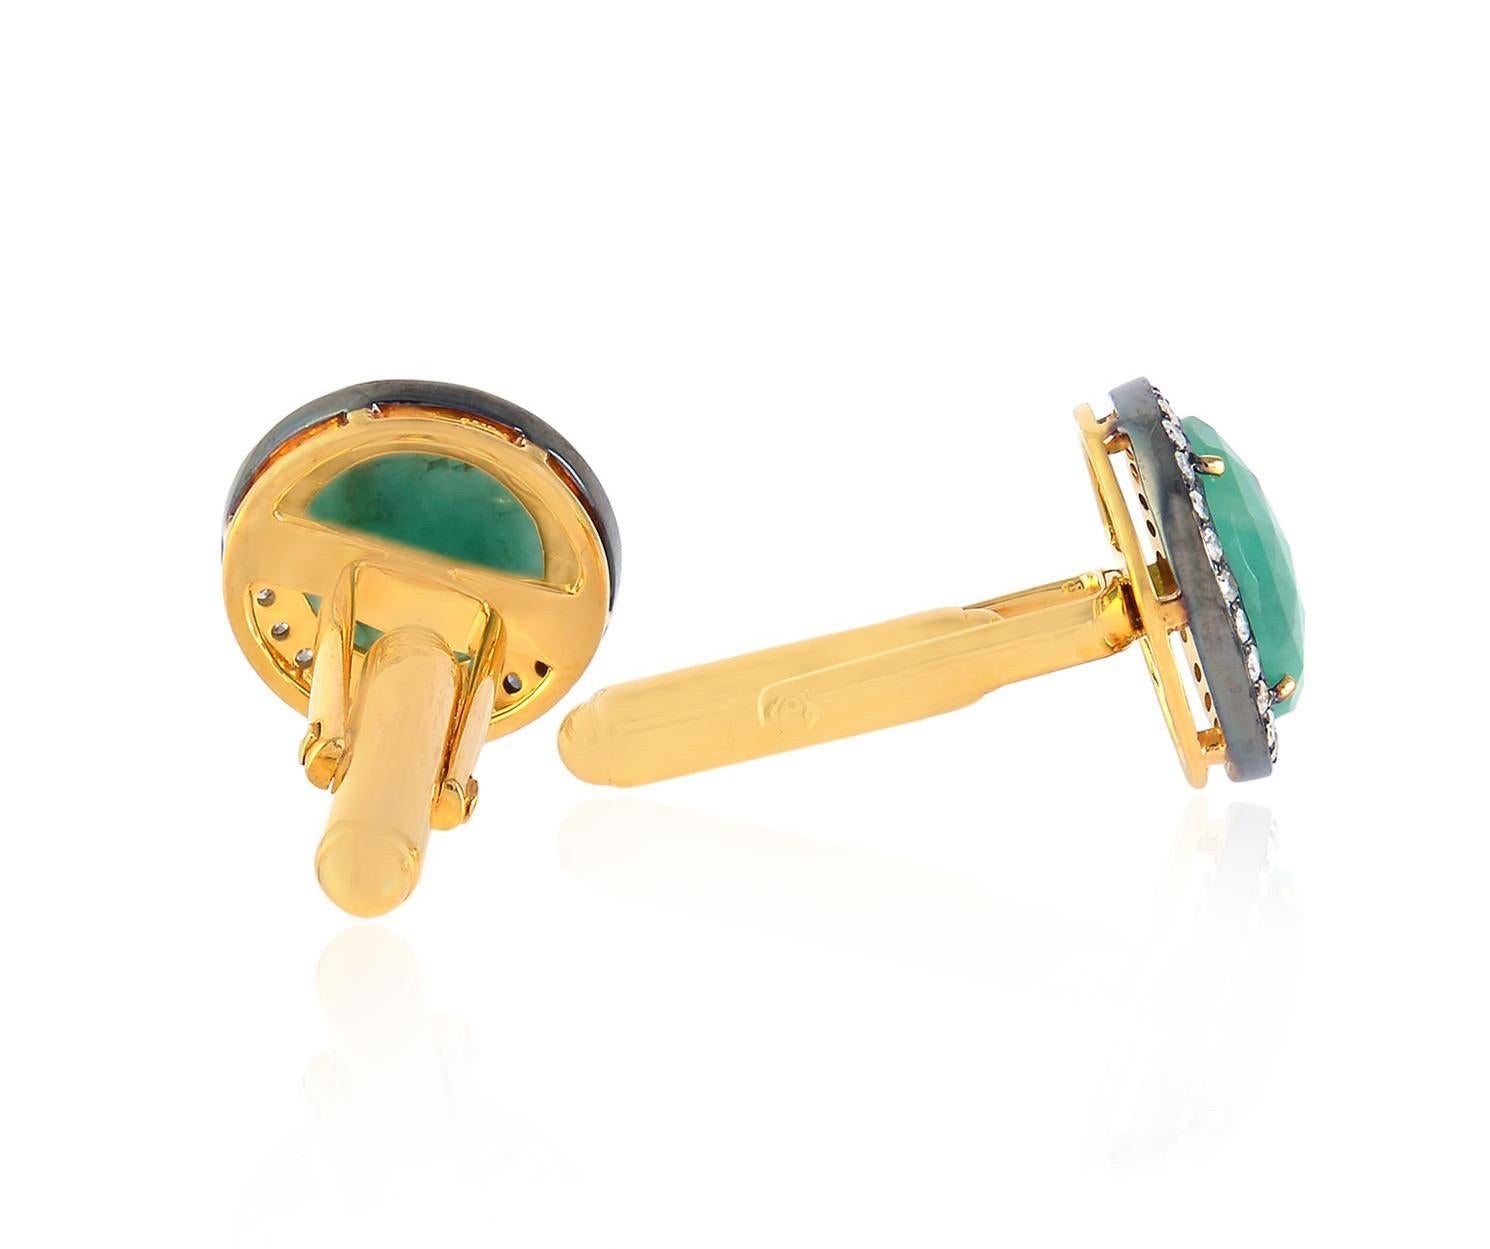 Cast from 14-karat gold and sterling silver, these cuff links are hand set with 7.77 carats emerald and .72 carats of pave diamonds in blackened finish.

FOLLOW  MEGHNA JEWELS storefront to view the latest collection & exclusive pieces.  Meghna